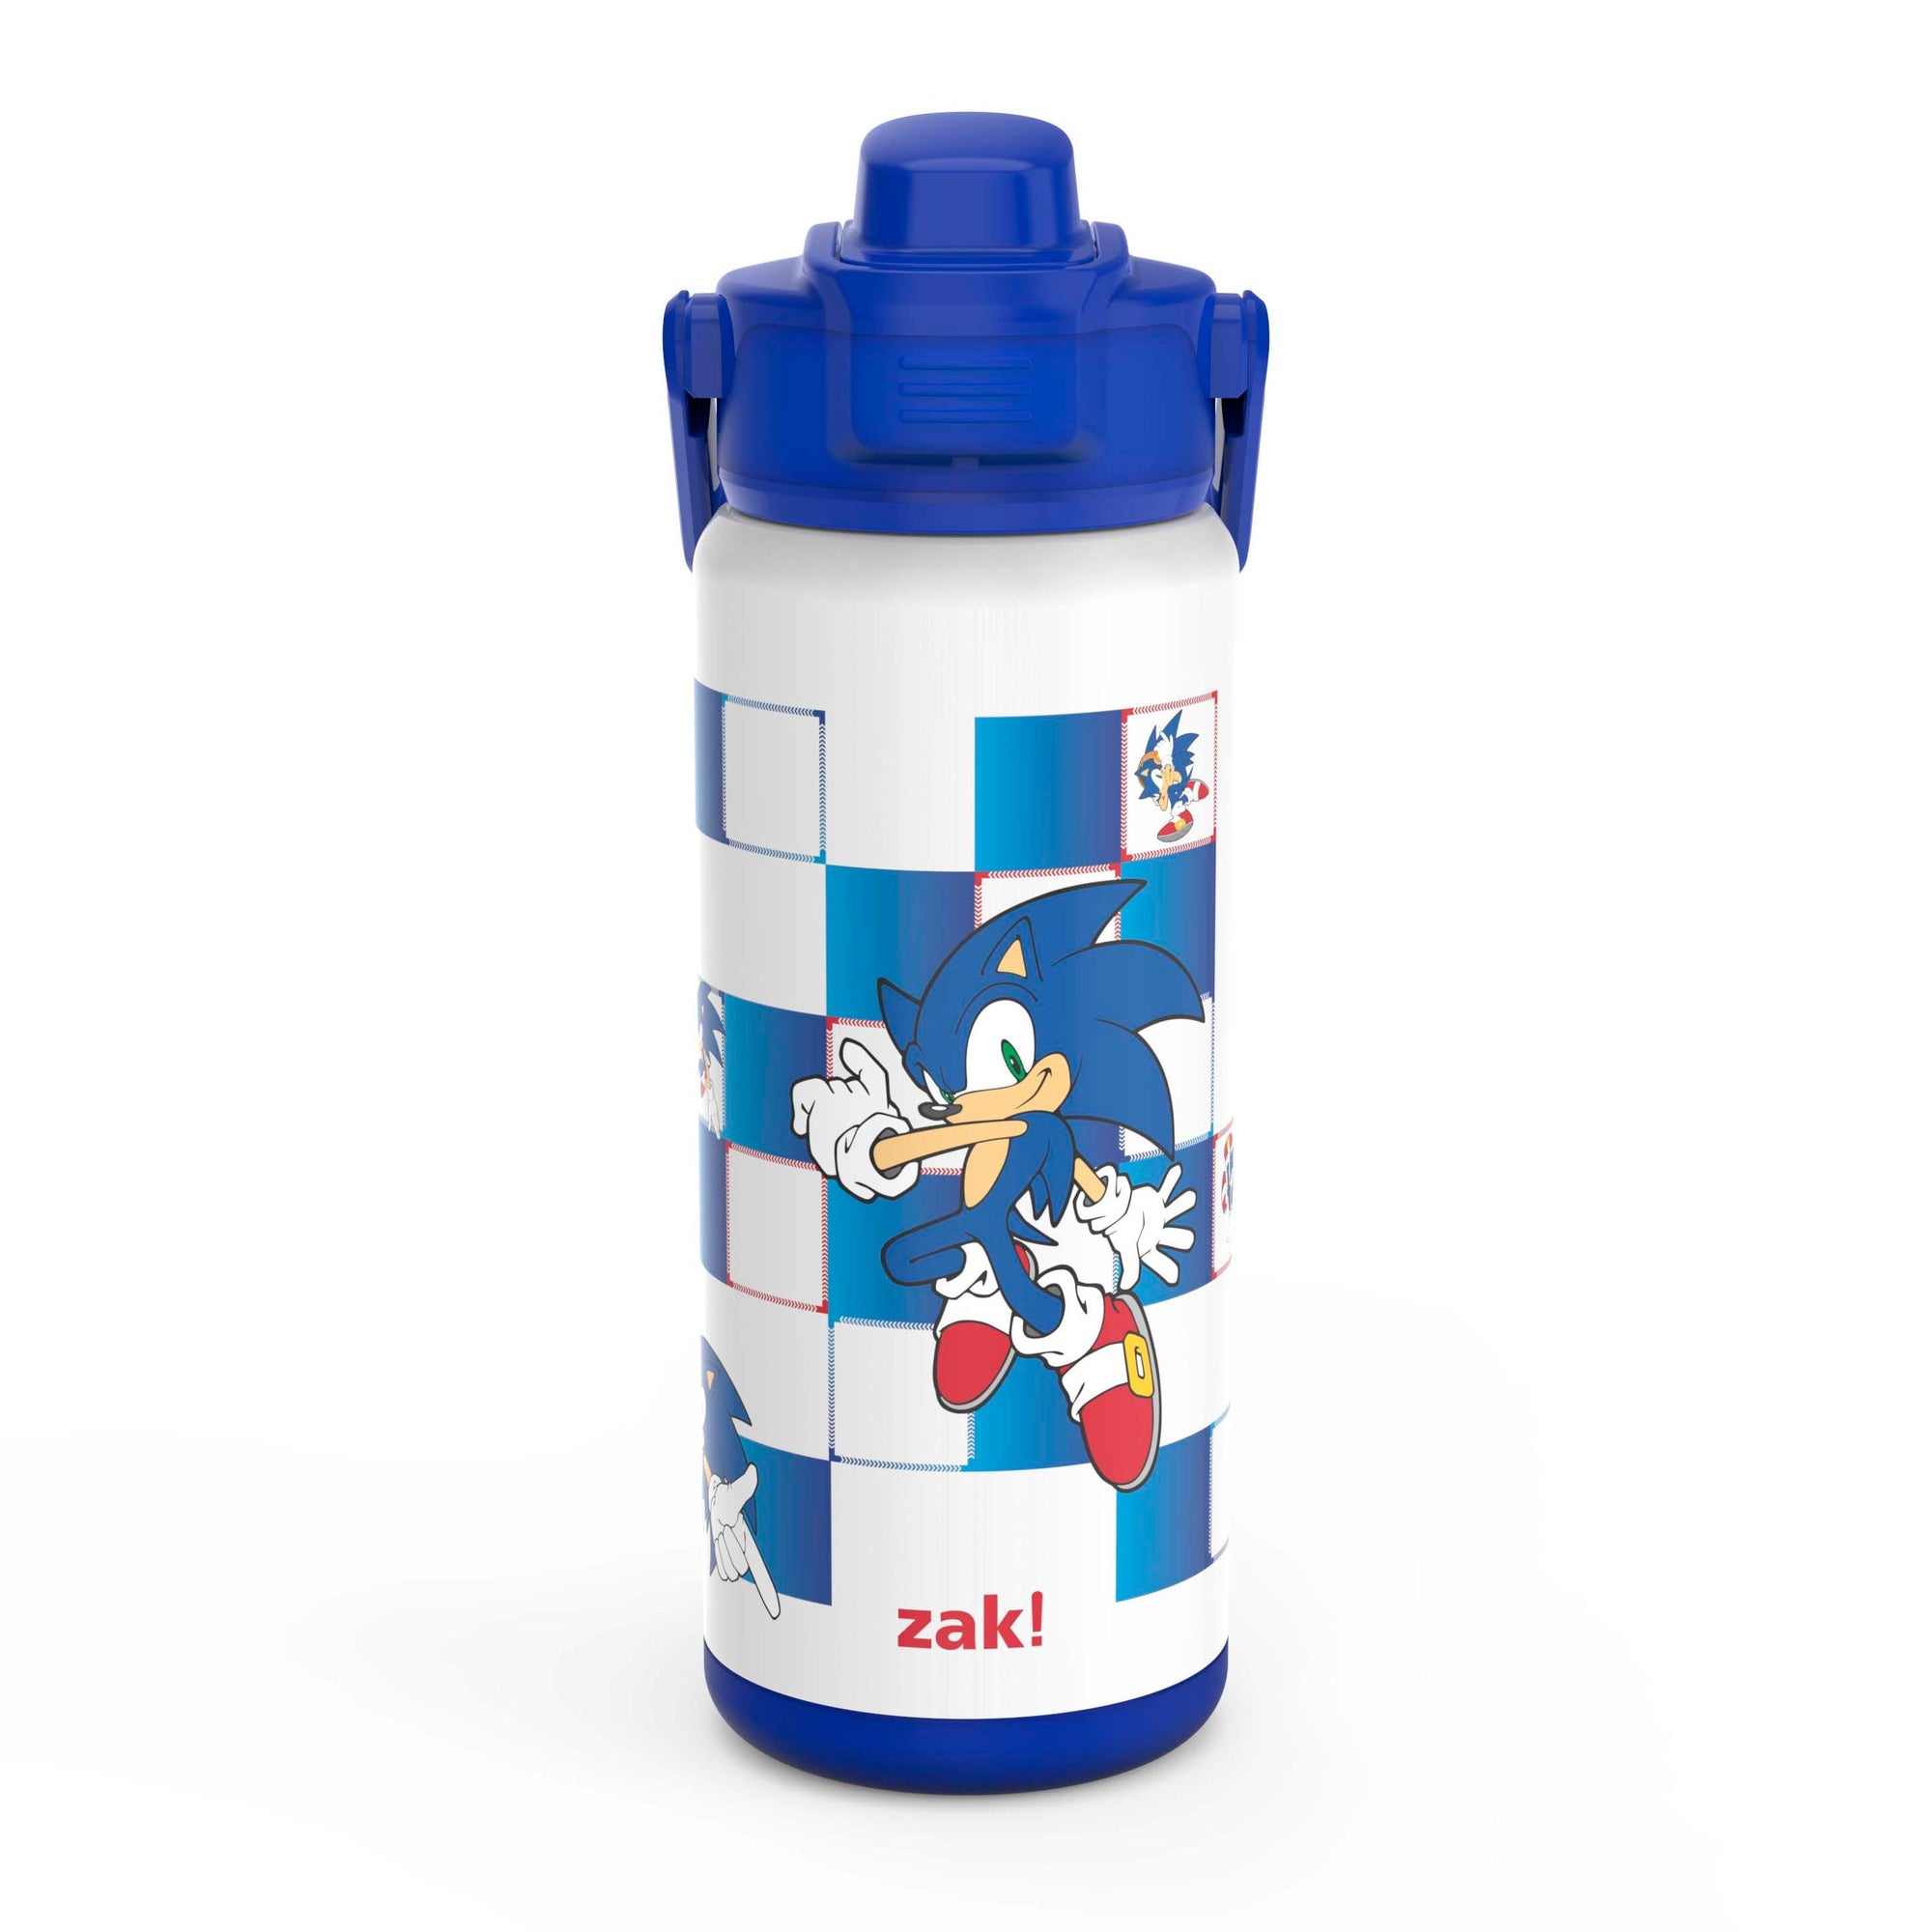 Sonic the Hedgehog Beacon Stainless Steel Insulated Kids Water Bottle with Covered Spout, 20 Ounces